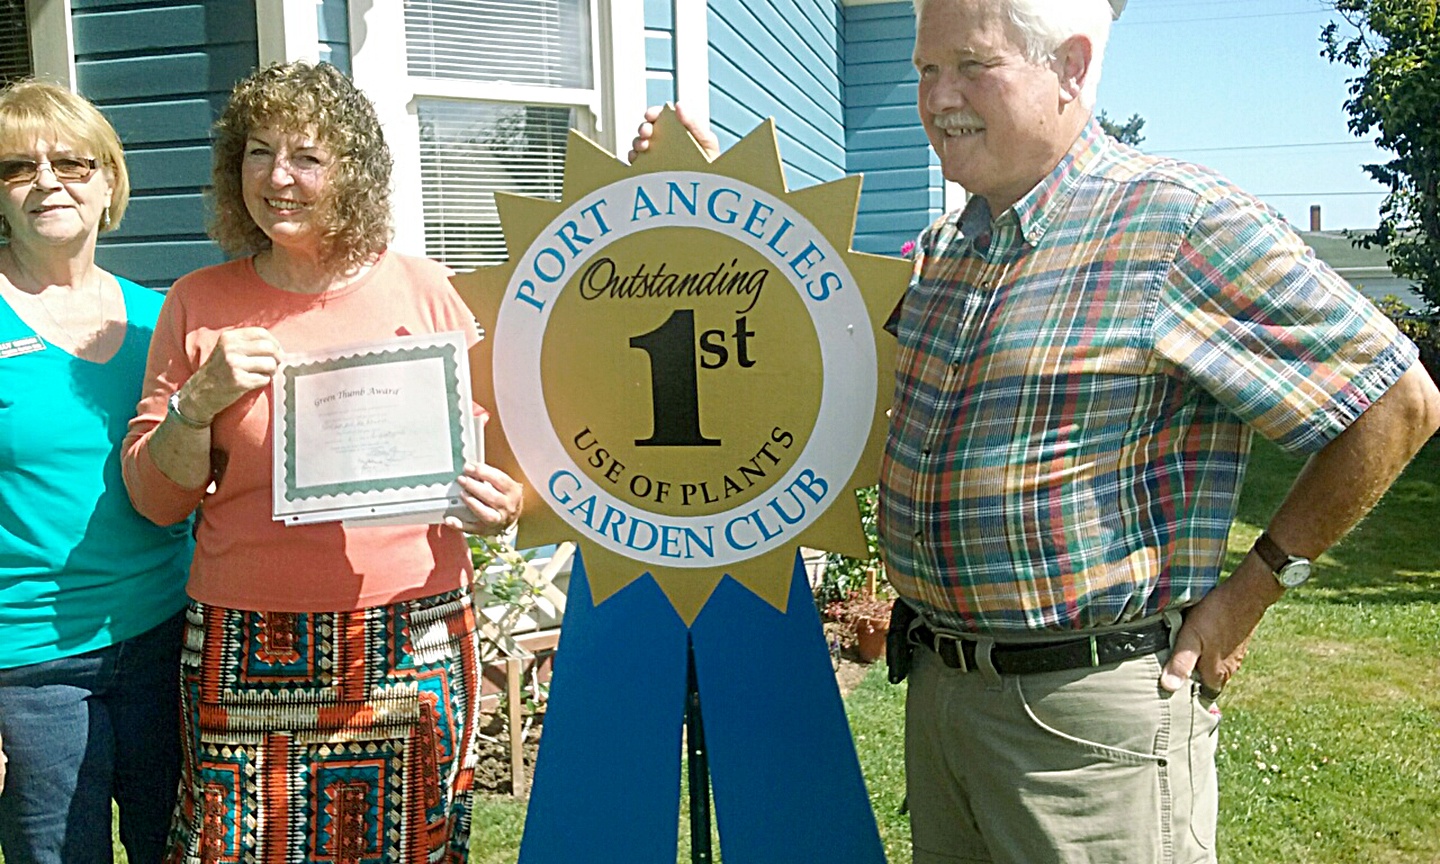 The Port Angeles Garden Club has awarded the Summer Green Thumb Award to Gail and Paul McDonald.